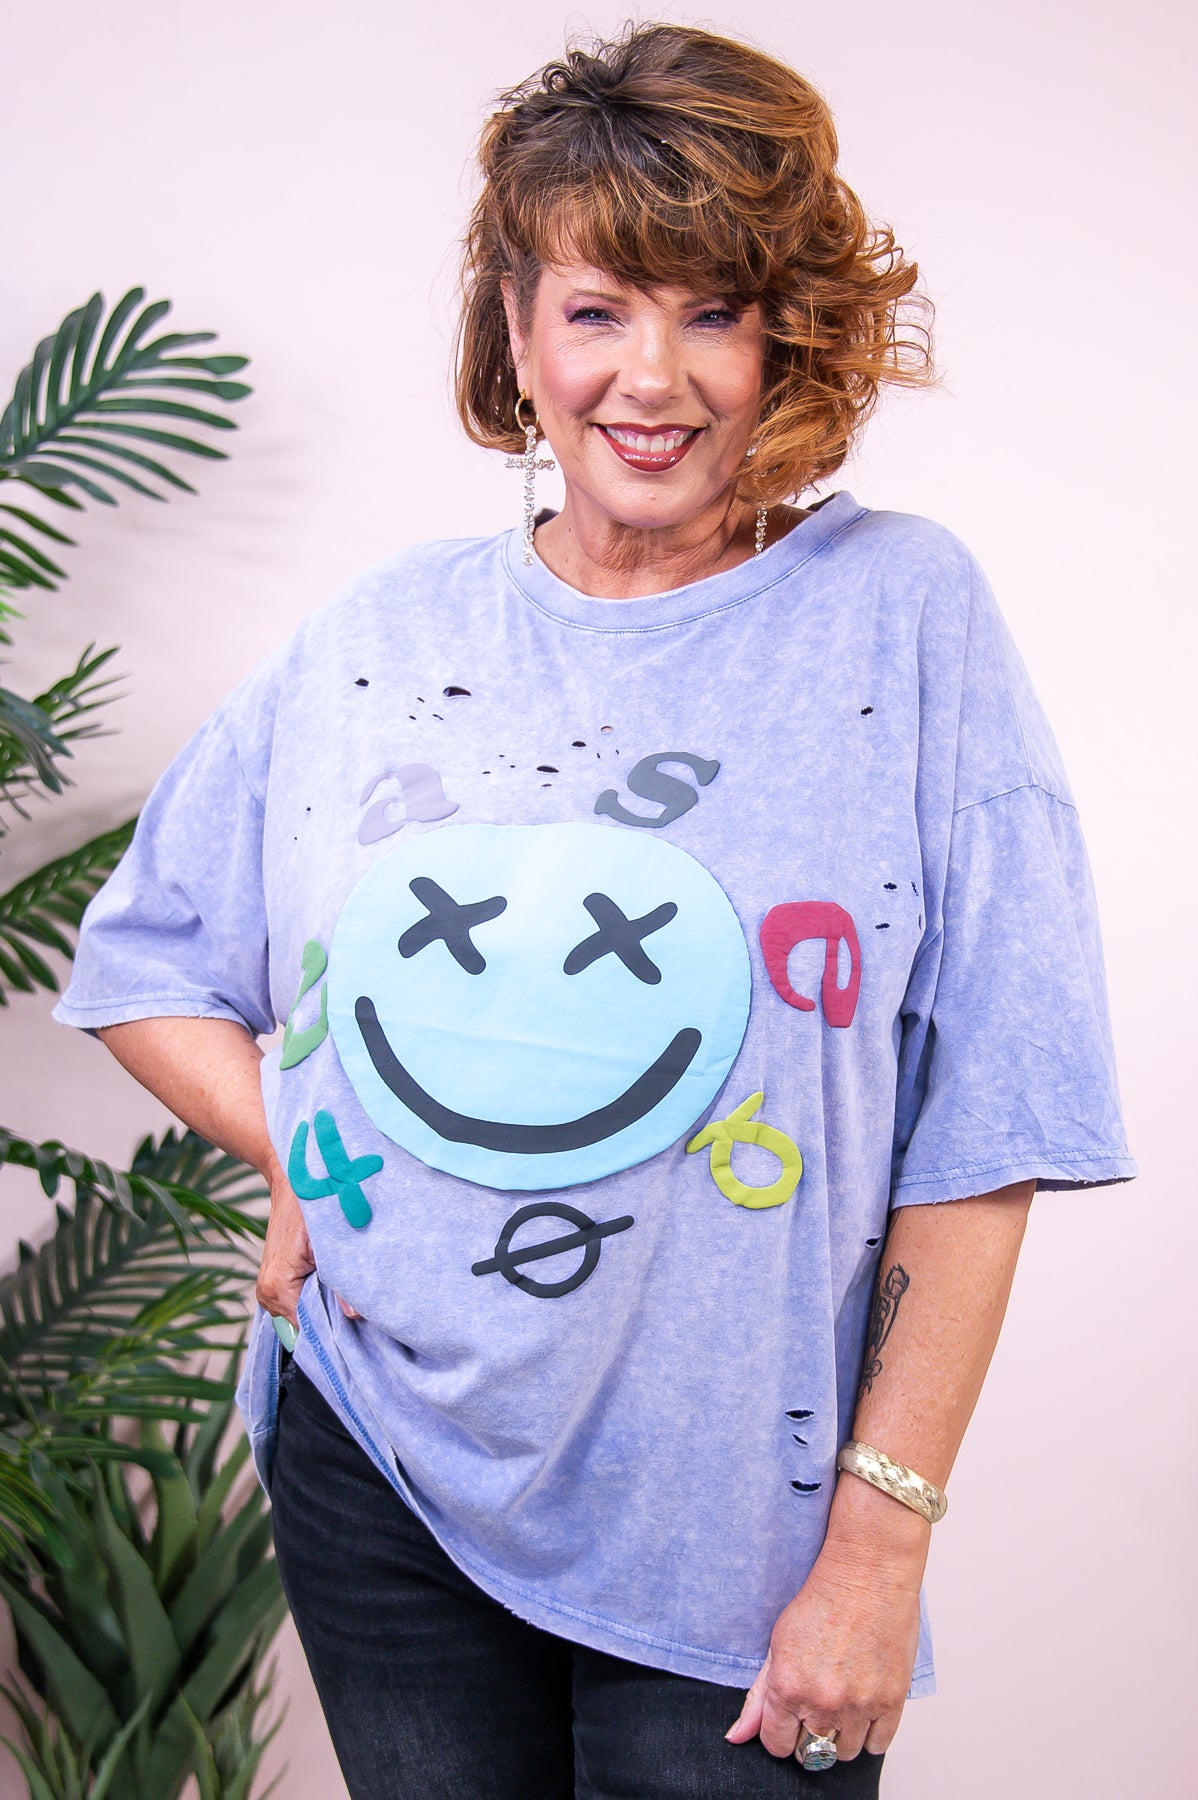 Smilin' And Stylin' Periwinkle/Multi Color Smiley Face Distressed Top - T8908PW